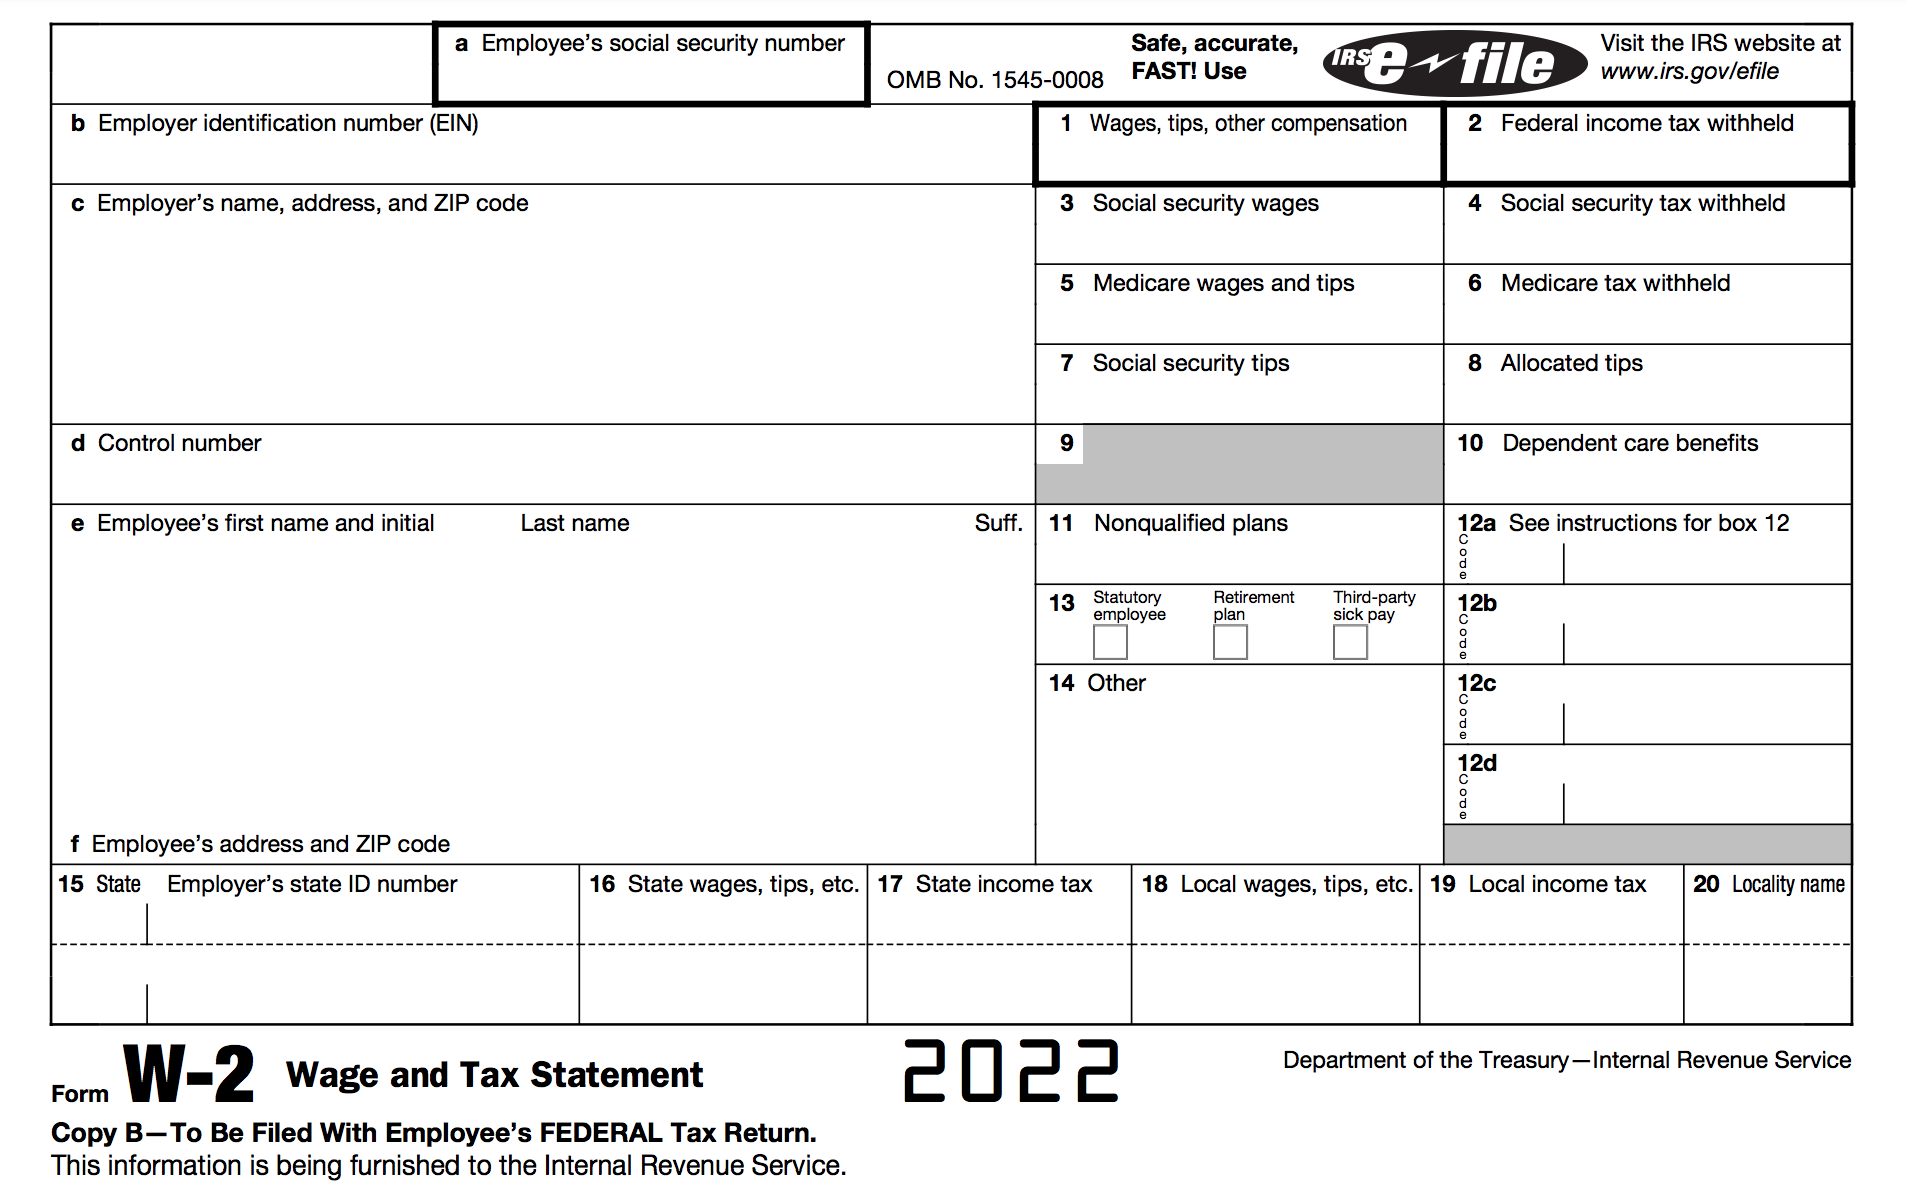 SmartAsset: How to Fill Out a W-2 Form